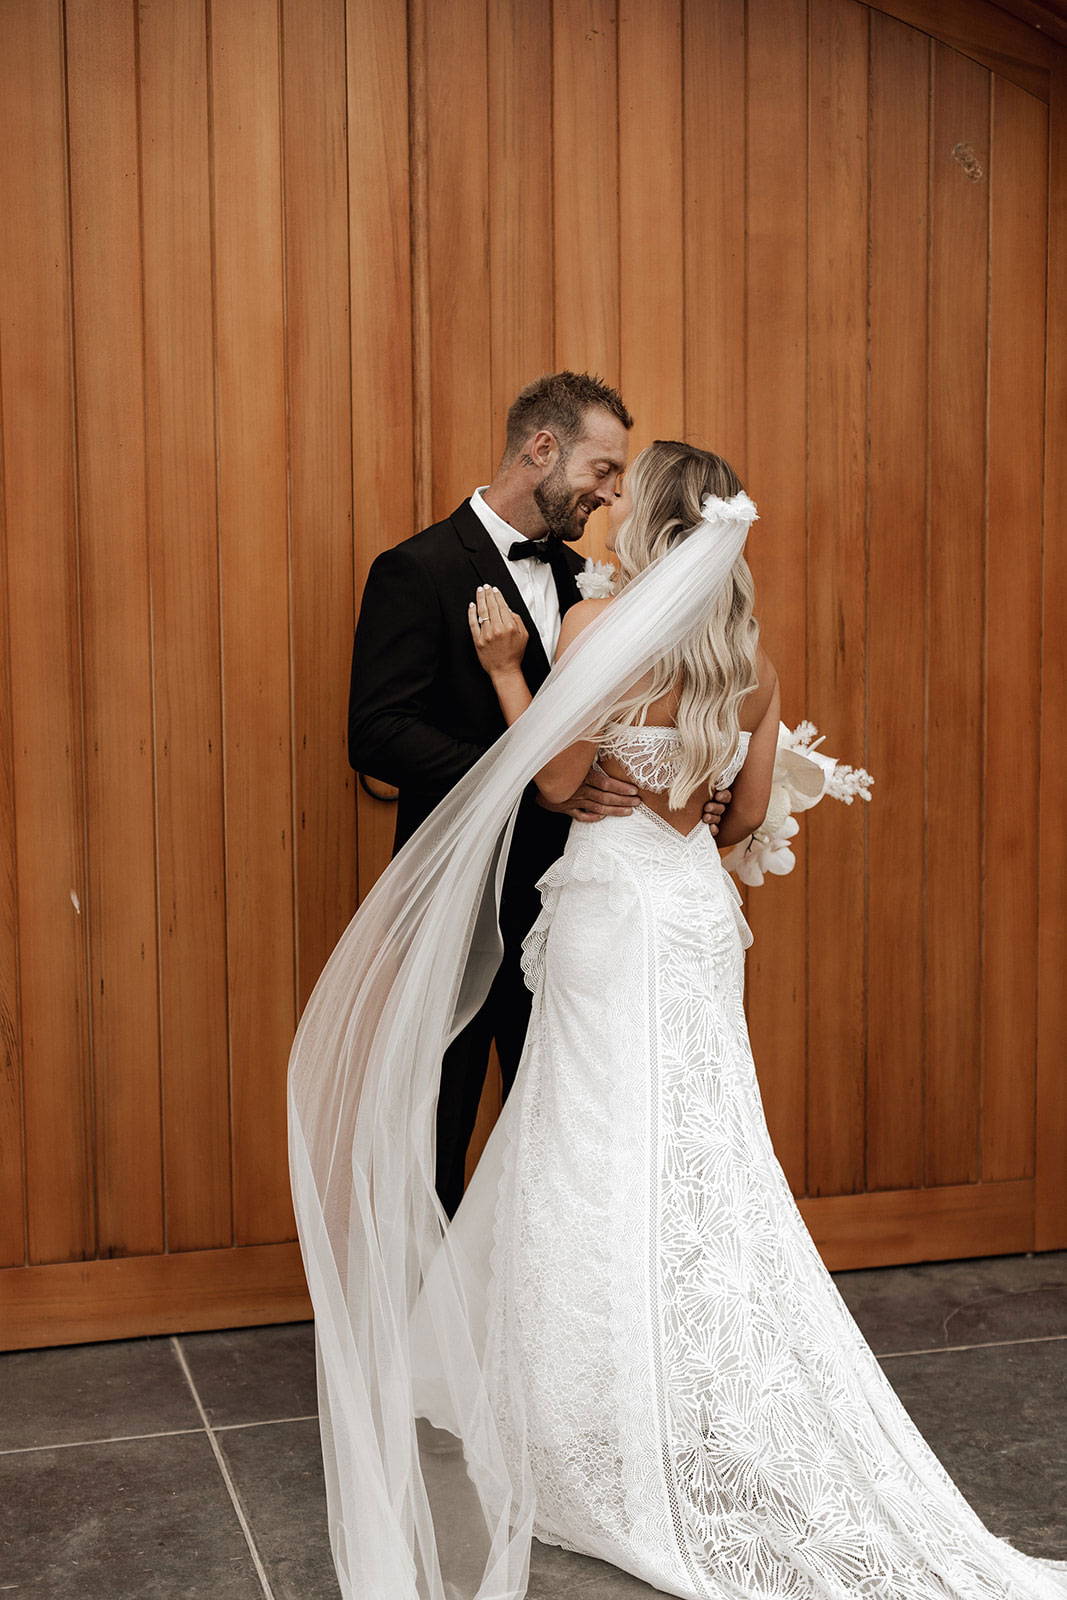 Bride wearing the Monet Veil and Noah gown